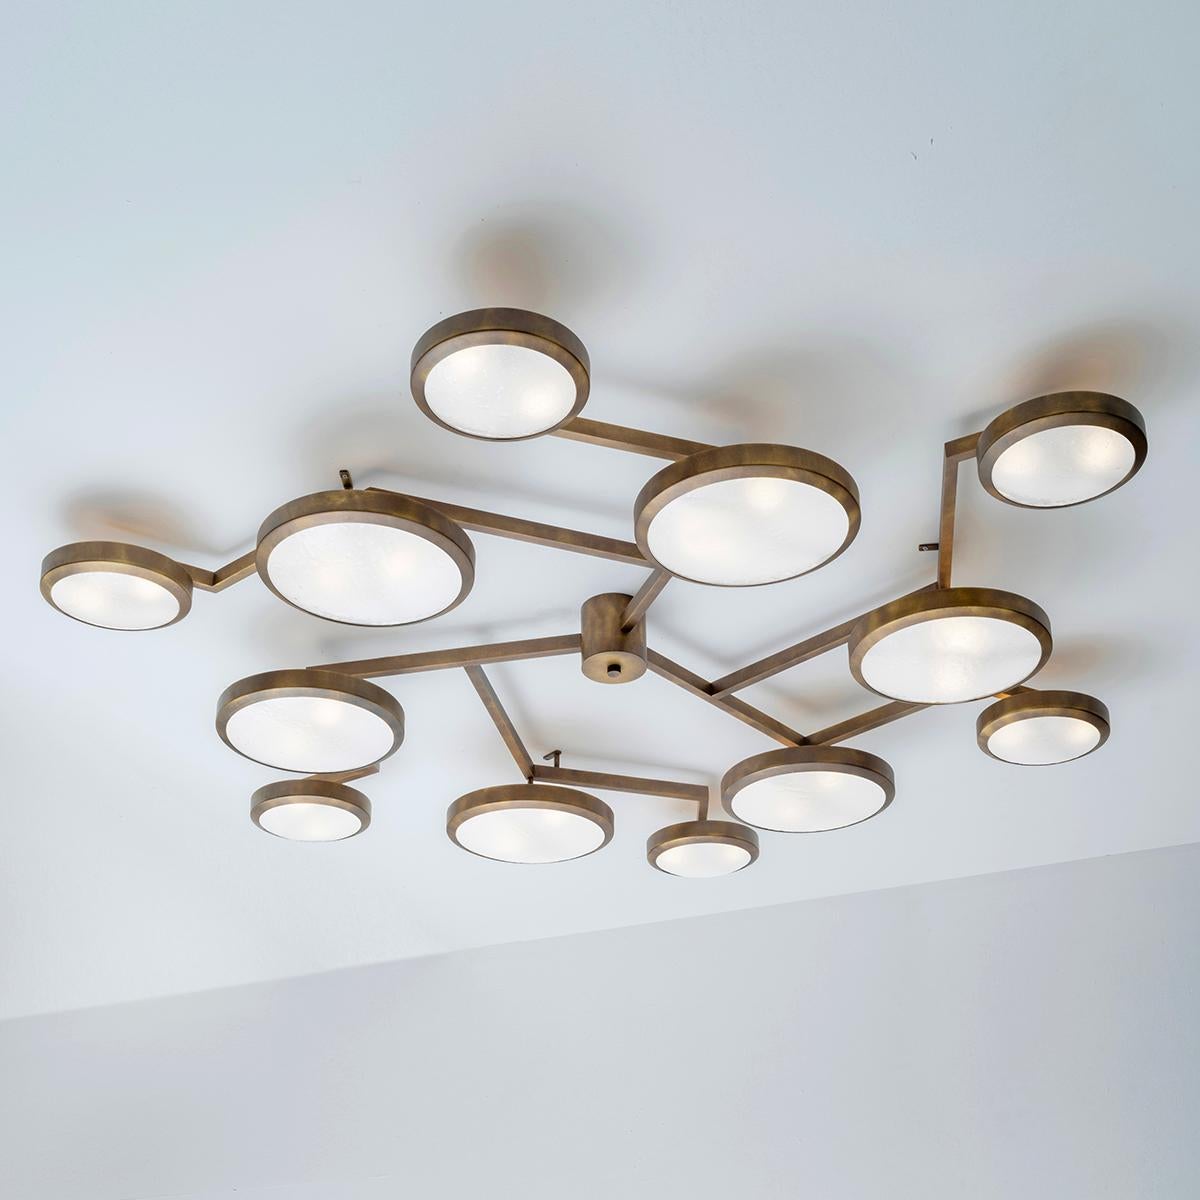 Italian Nuvola Ceiling Light by Gaspare Asaro - Polished Brass Finish For Sale